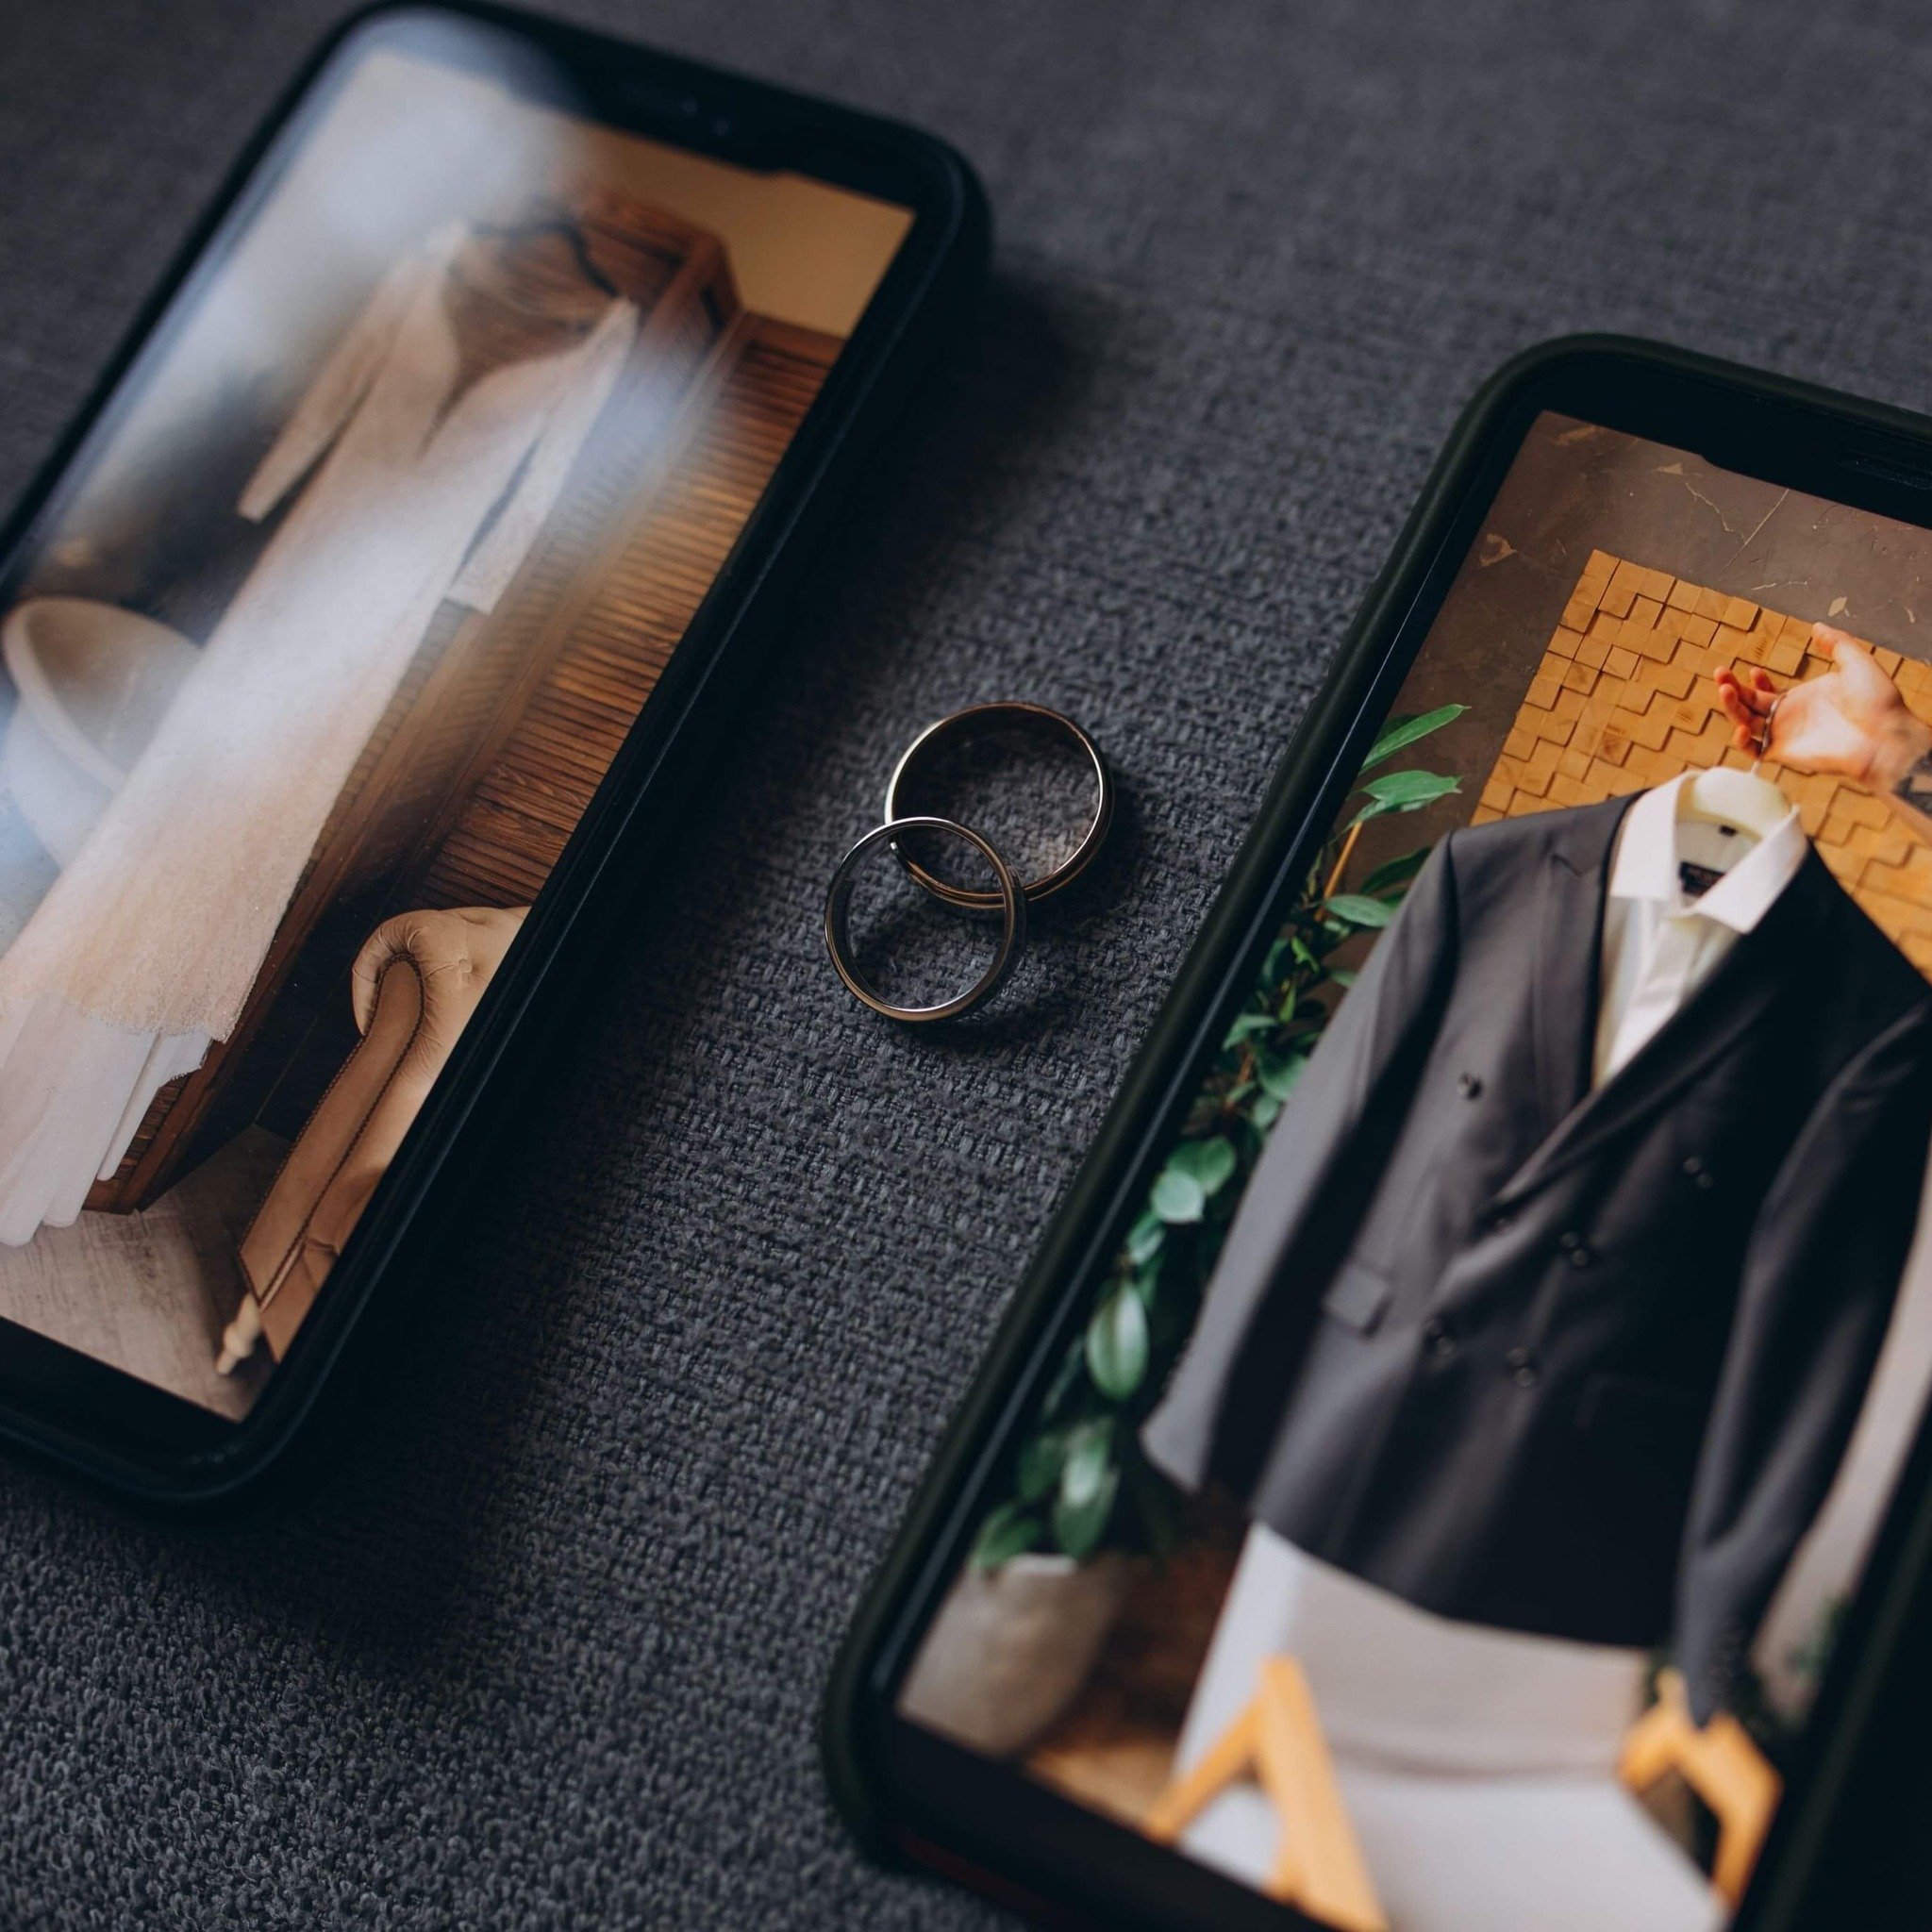 ON THE BLOG: Wedding Content Creators: The Trend, The Pros and The Cons 📱 

Weddings are a beautiful combination of memories waiting to be captured. In recent years, a new trend has emerged in the world of wedding planning: wedding content creators.